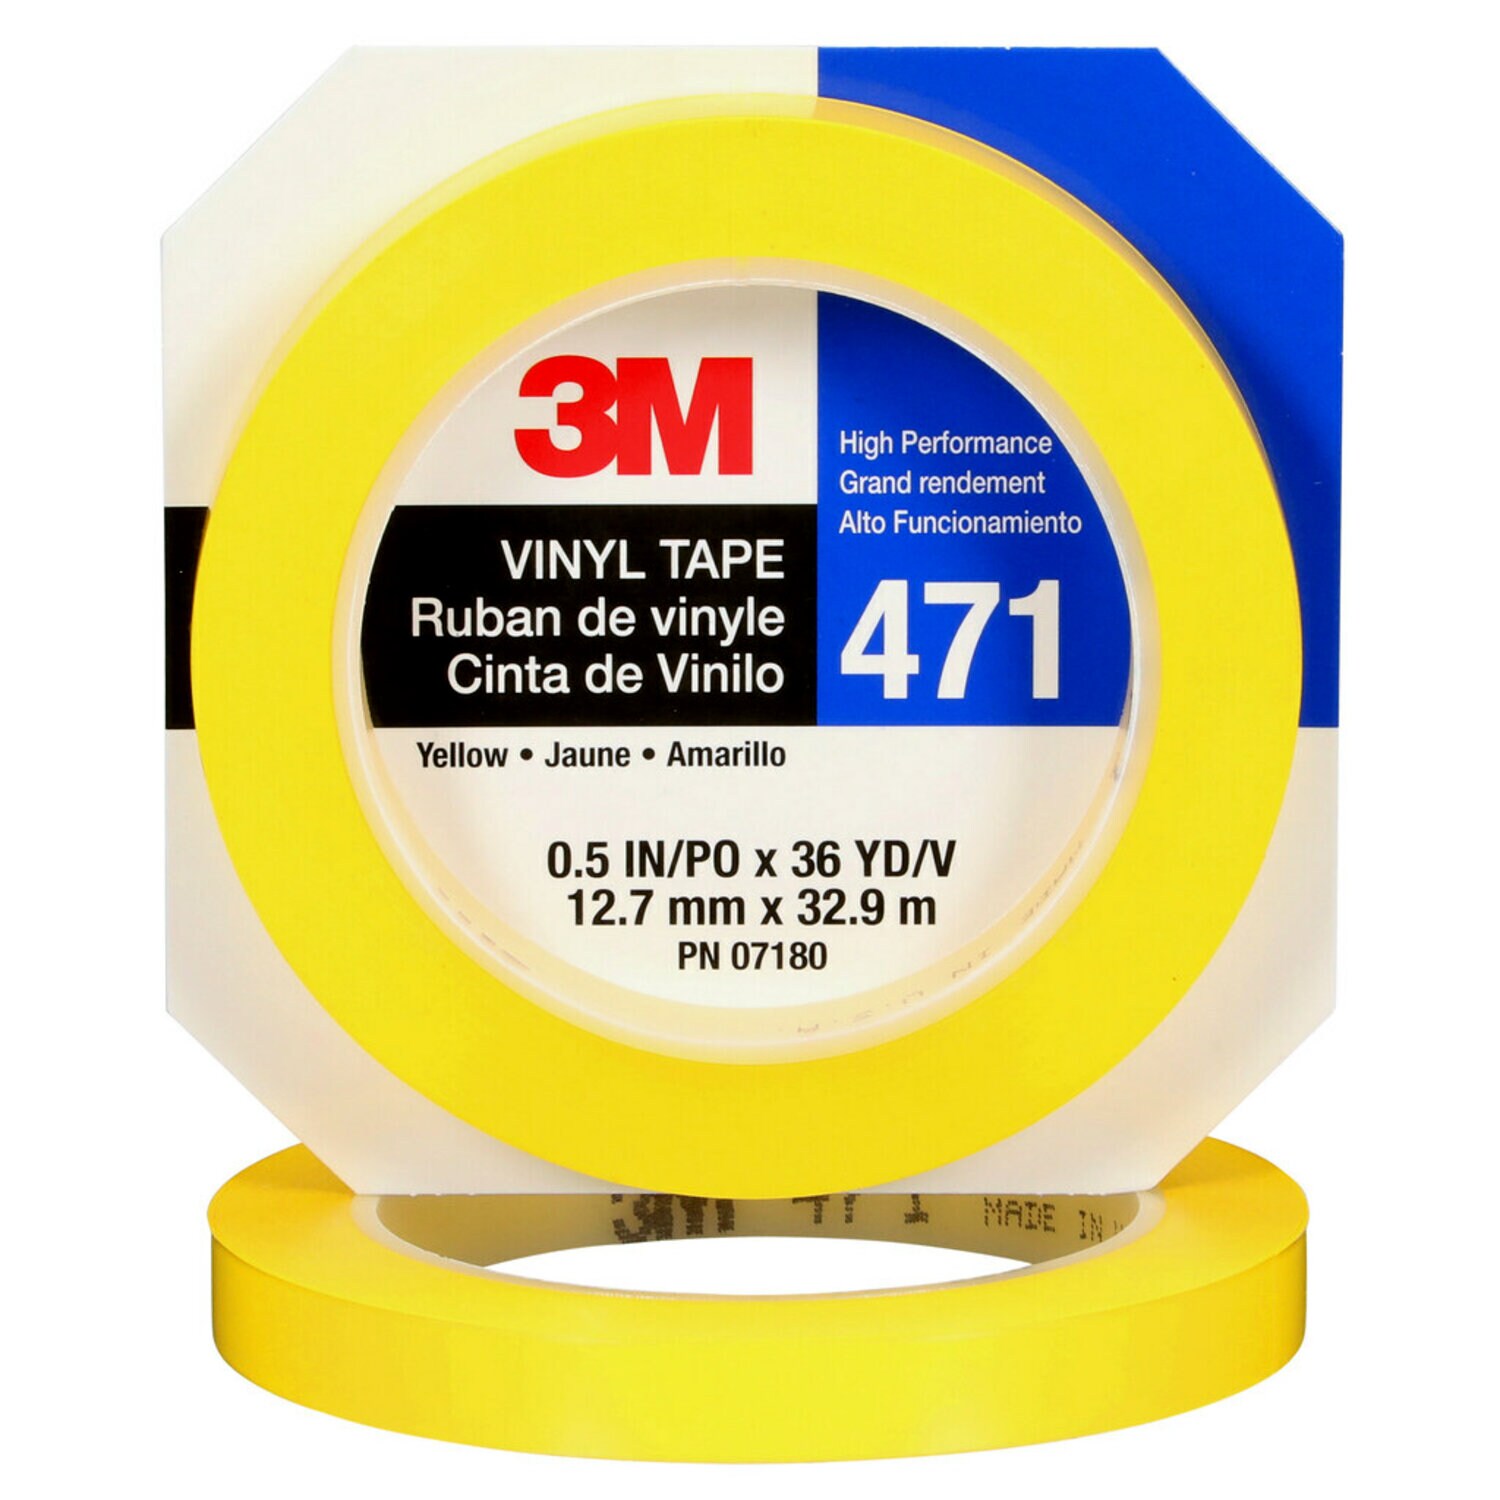 7100044646 - 3M Vinyl Tape 471, Yellow, 1/2 in x 36 yd, 5.2 mil, 72 rolls per case,
Individually Wrapped Conveniently Packaged